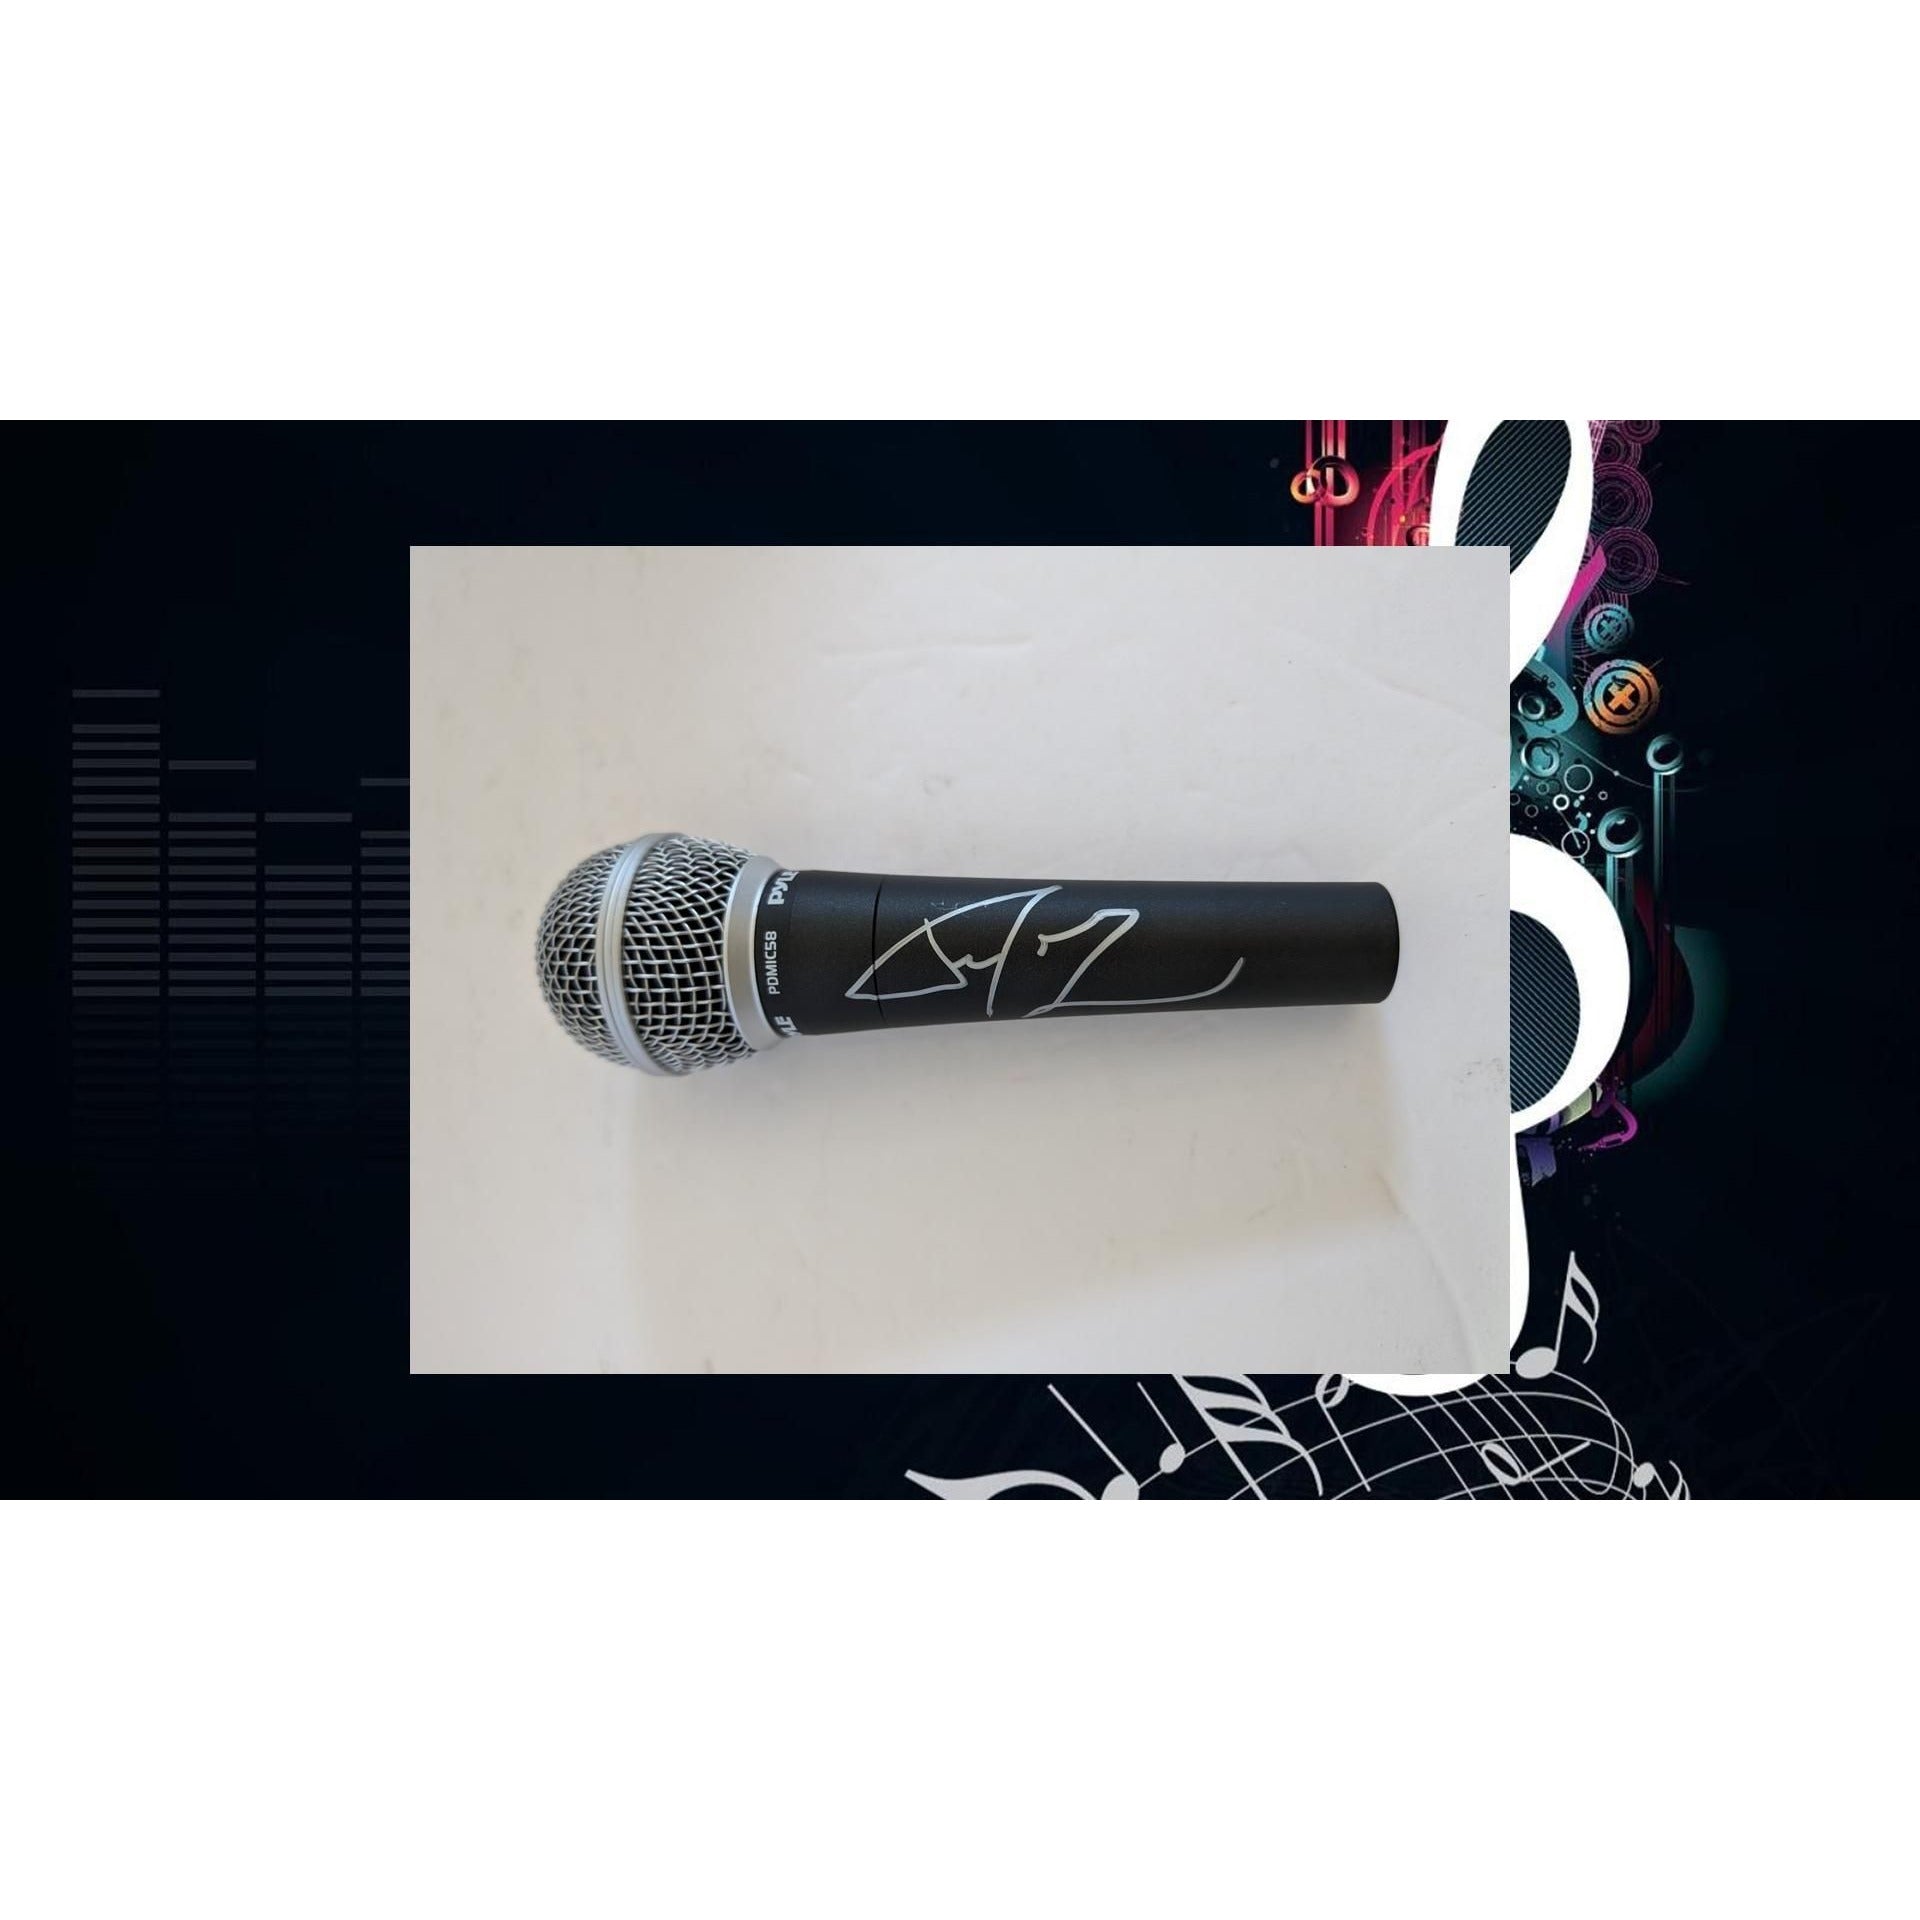 Shawn Corey Carter 'Jay Z' microphone signed with proof